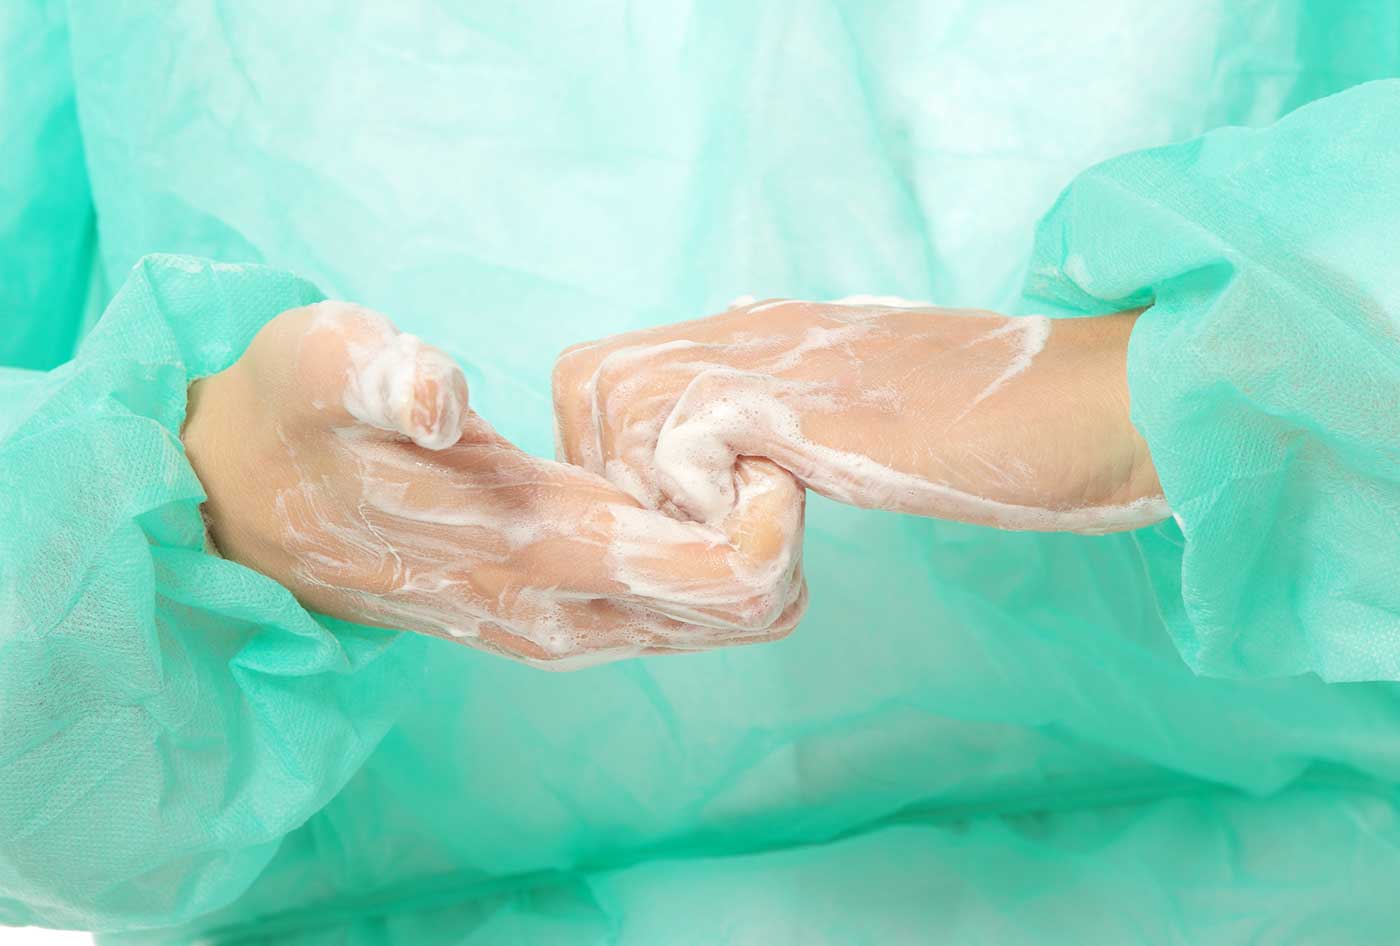 Infection Prevention: The Importance of Standard Precautions